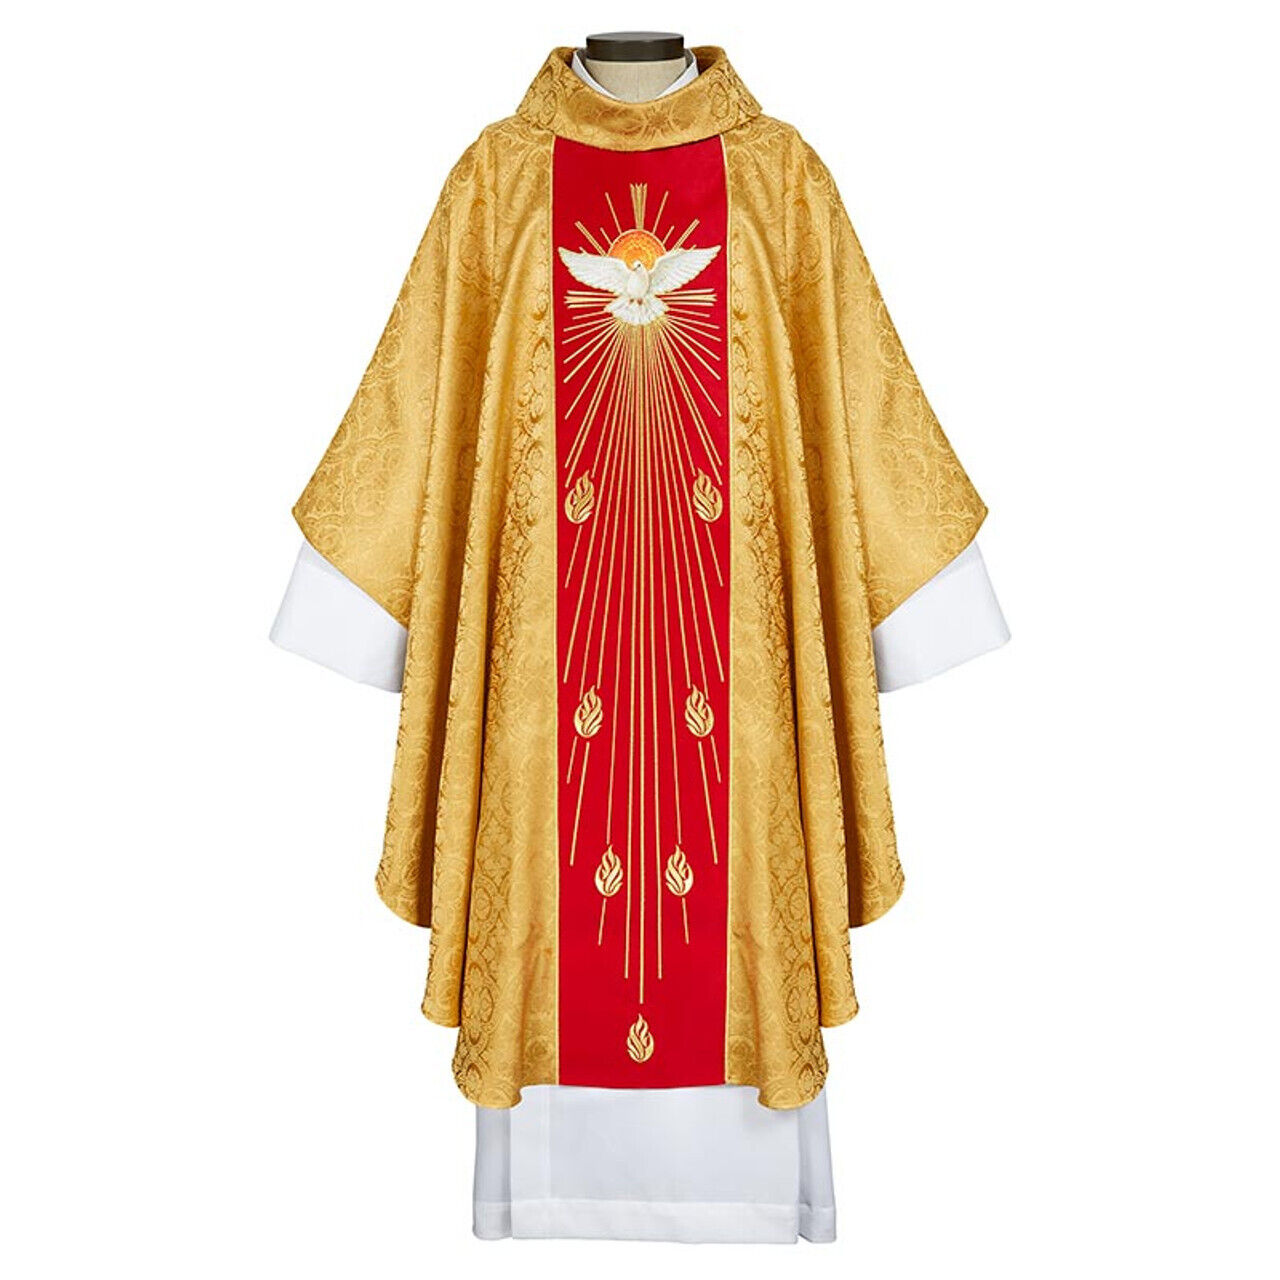 Come Holy Spirit Chasuble Golden Color Cowl Collar Embroidered 51 Inch x 59 Inch